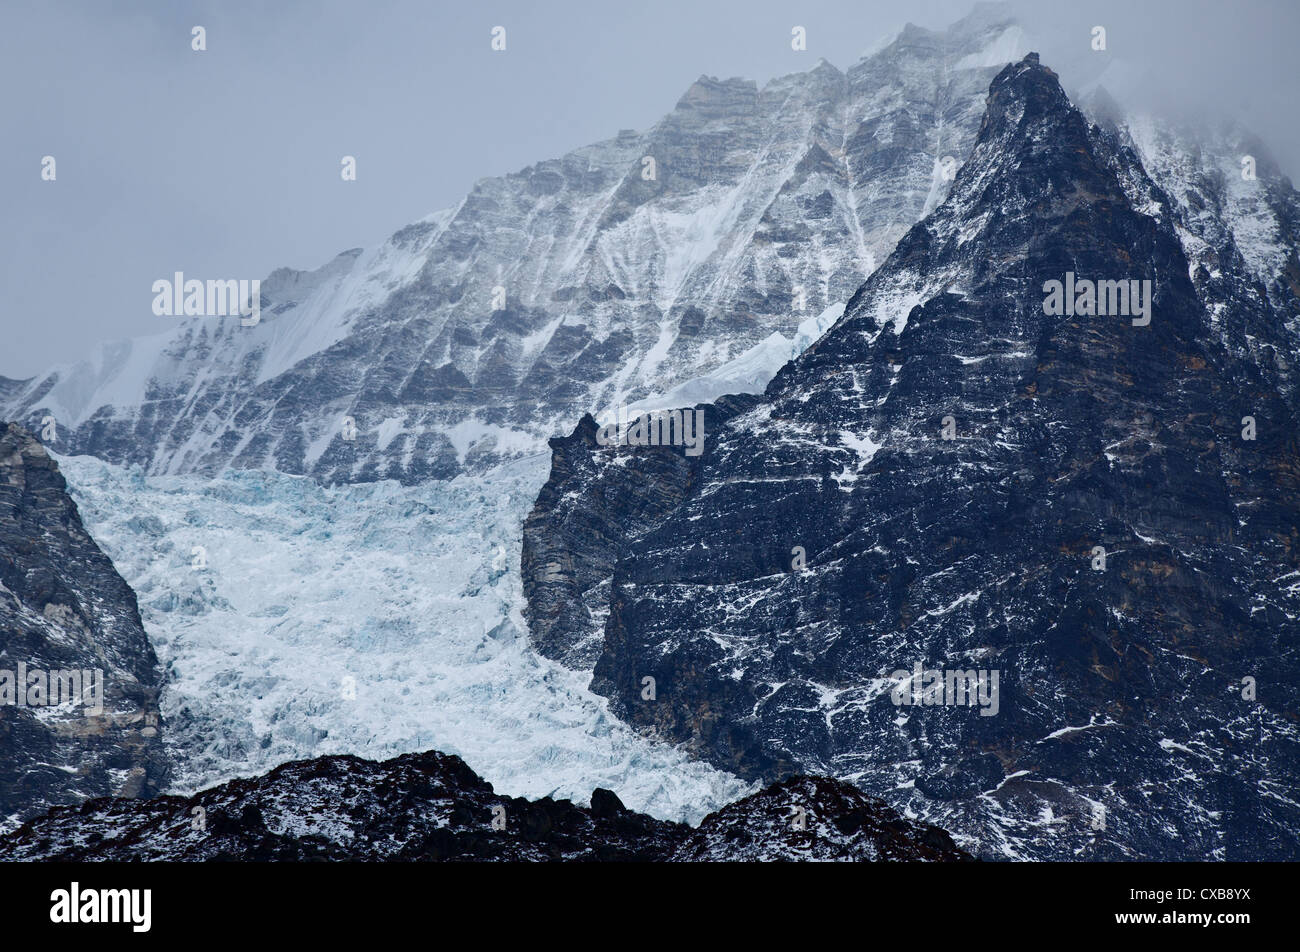 Snowcapped mountains and a frozen glacier behind the village of Kyanjin Gompa, Langtang Valley, Nepal Stock Photo